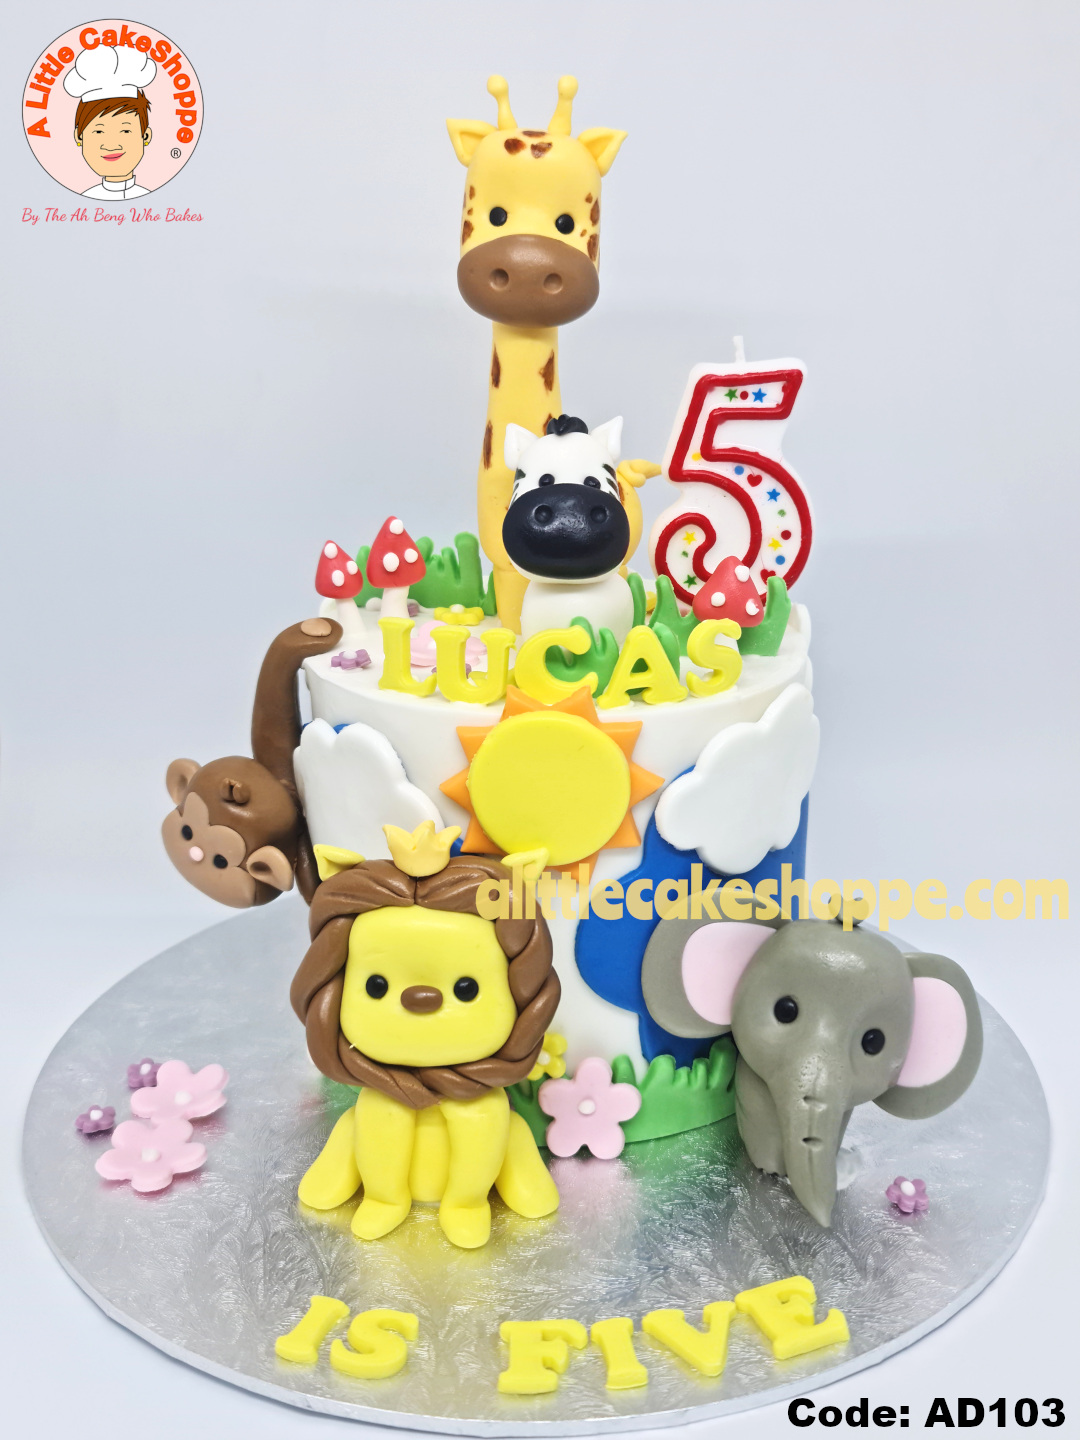 Best Cake Shop Singapore Delivery Best Customised Cake Shop Singapore customise cake custom cake 2D 3D birthday cake cupcakes desserts wedding corporate events anniversary 1st birthday 21st birthday fondant fresh cream buttercream cakes alittlecakeshoppe a little cake shoppe compliments review singapore bakers SG cake shop cakeshop ah beng who bakes sgbakes novelty cakes sgcakes licensed sfa nea cake delivery celebration cakes kids birthday cake surprise cake adult children animal